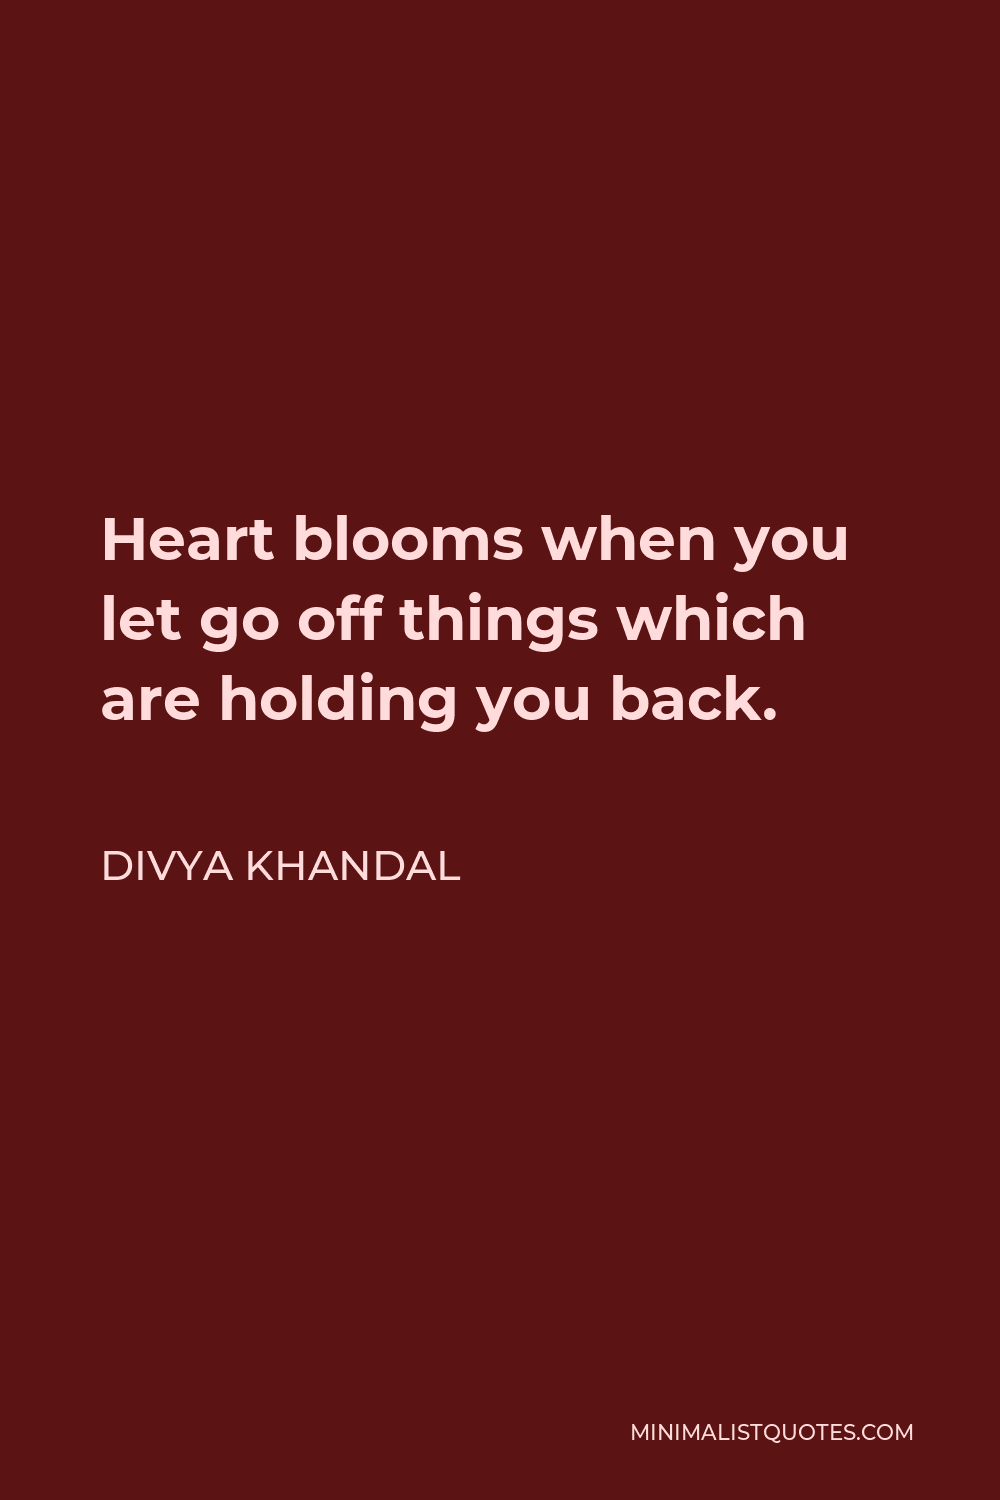 Divya khandal Quote - Heart blooms when you let go off things which are holding you back.